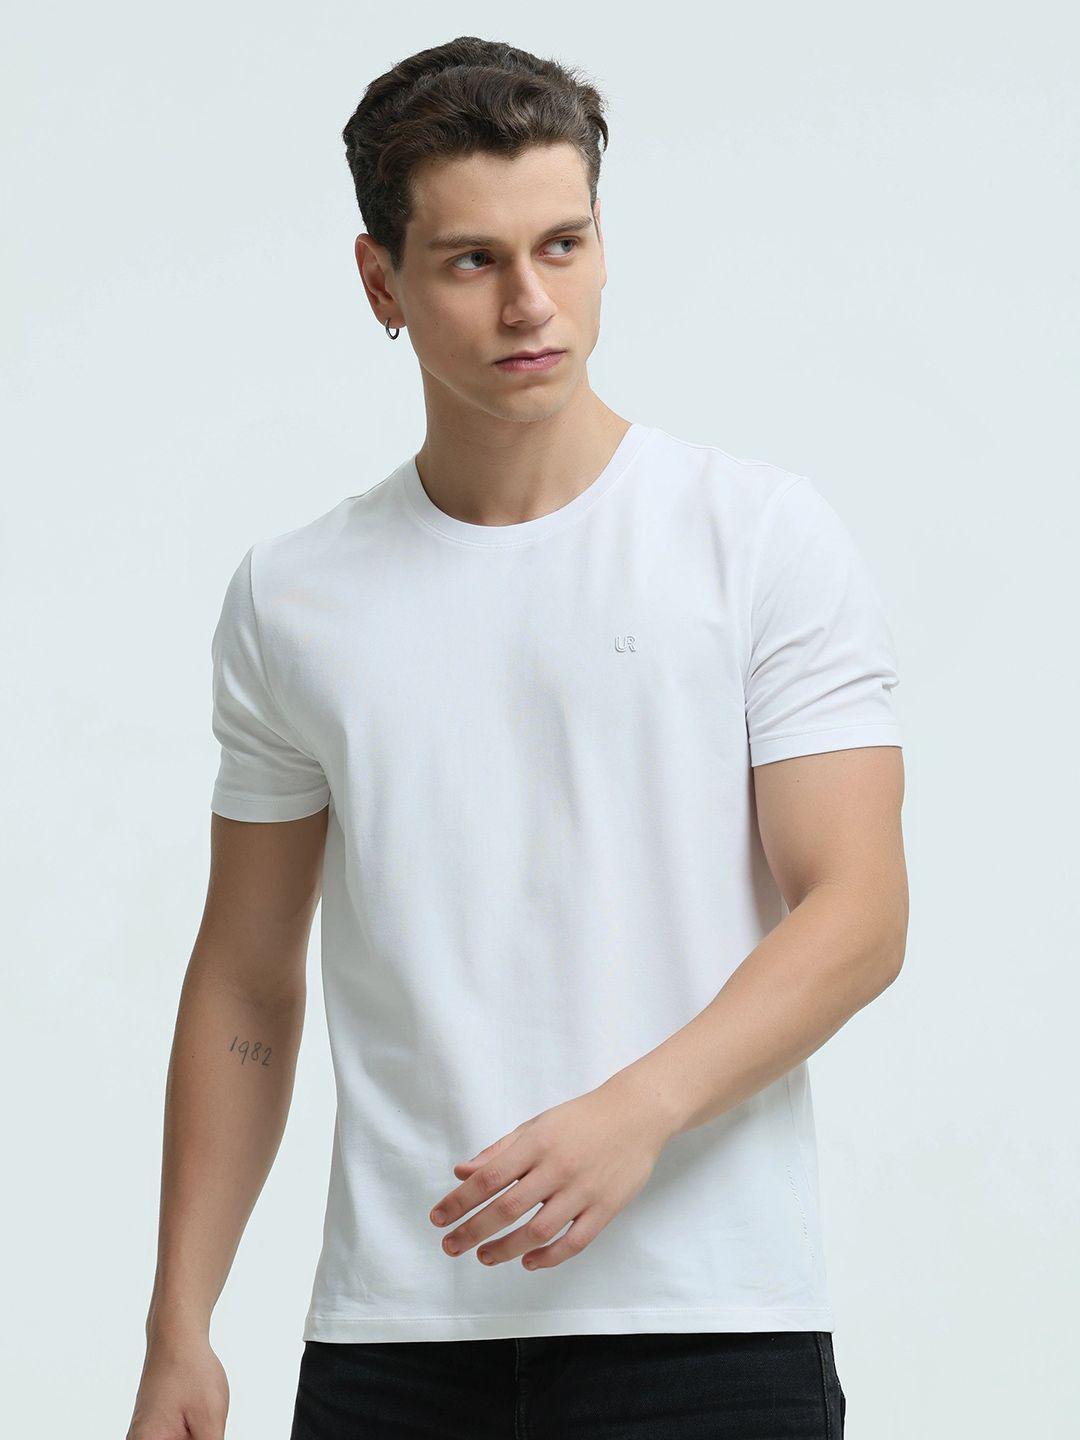 turms slim fit round neck short sleeves anti odour t-shirt